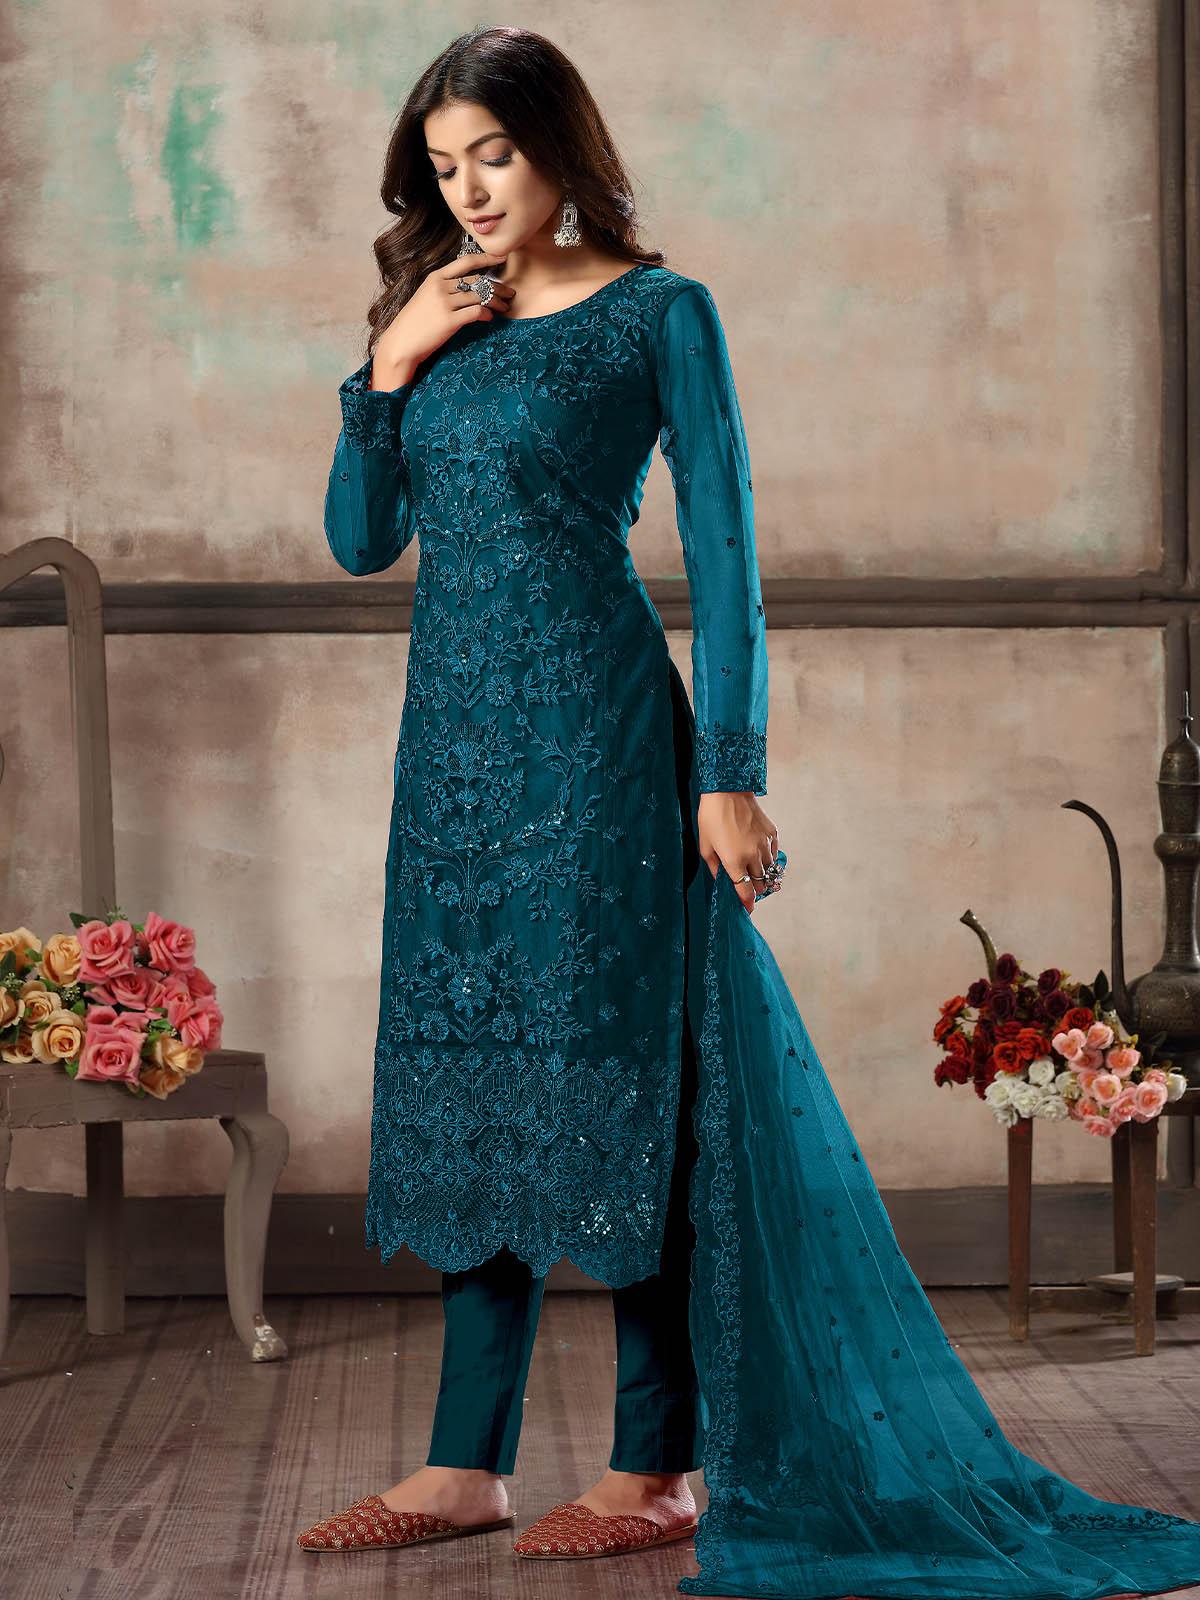 8 Different Types of Salwar Suits Trending This Year